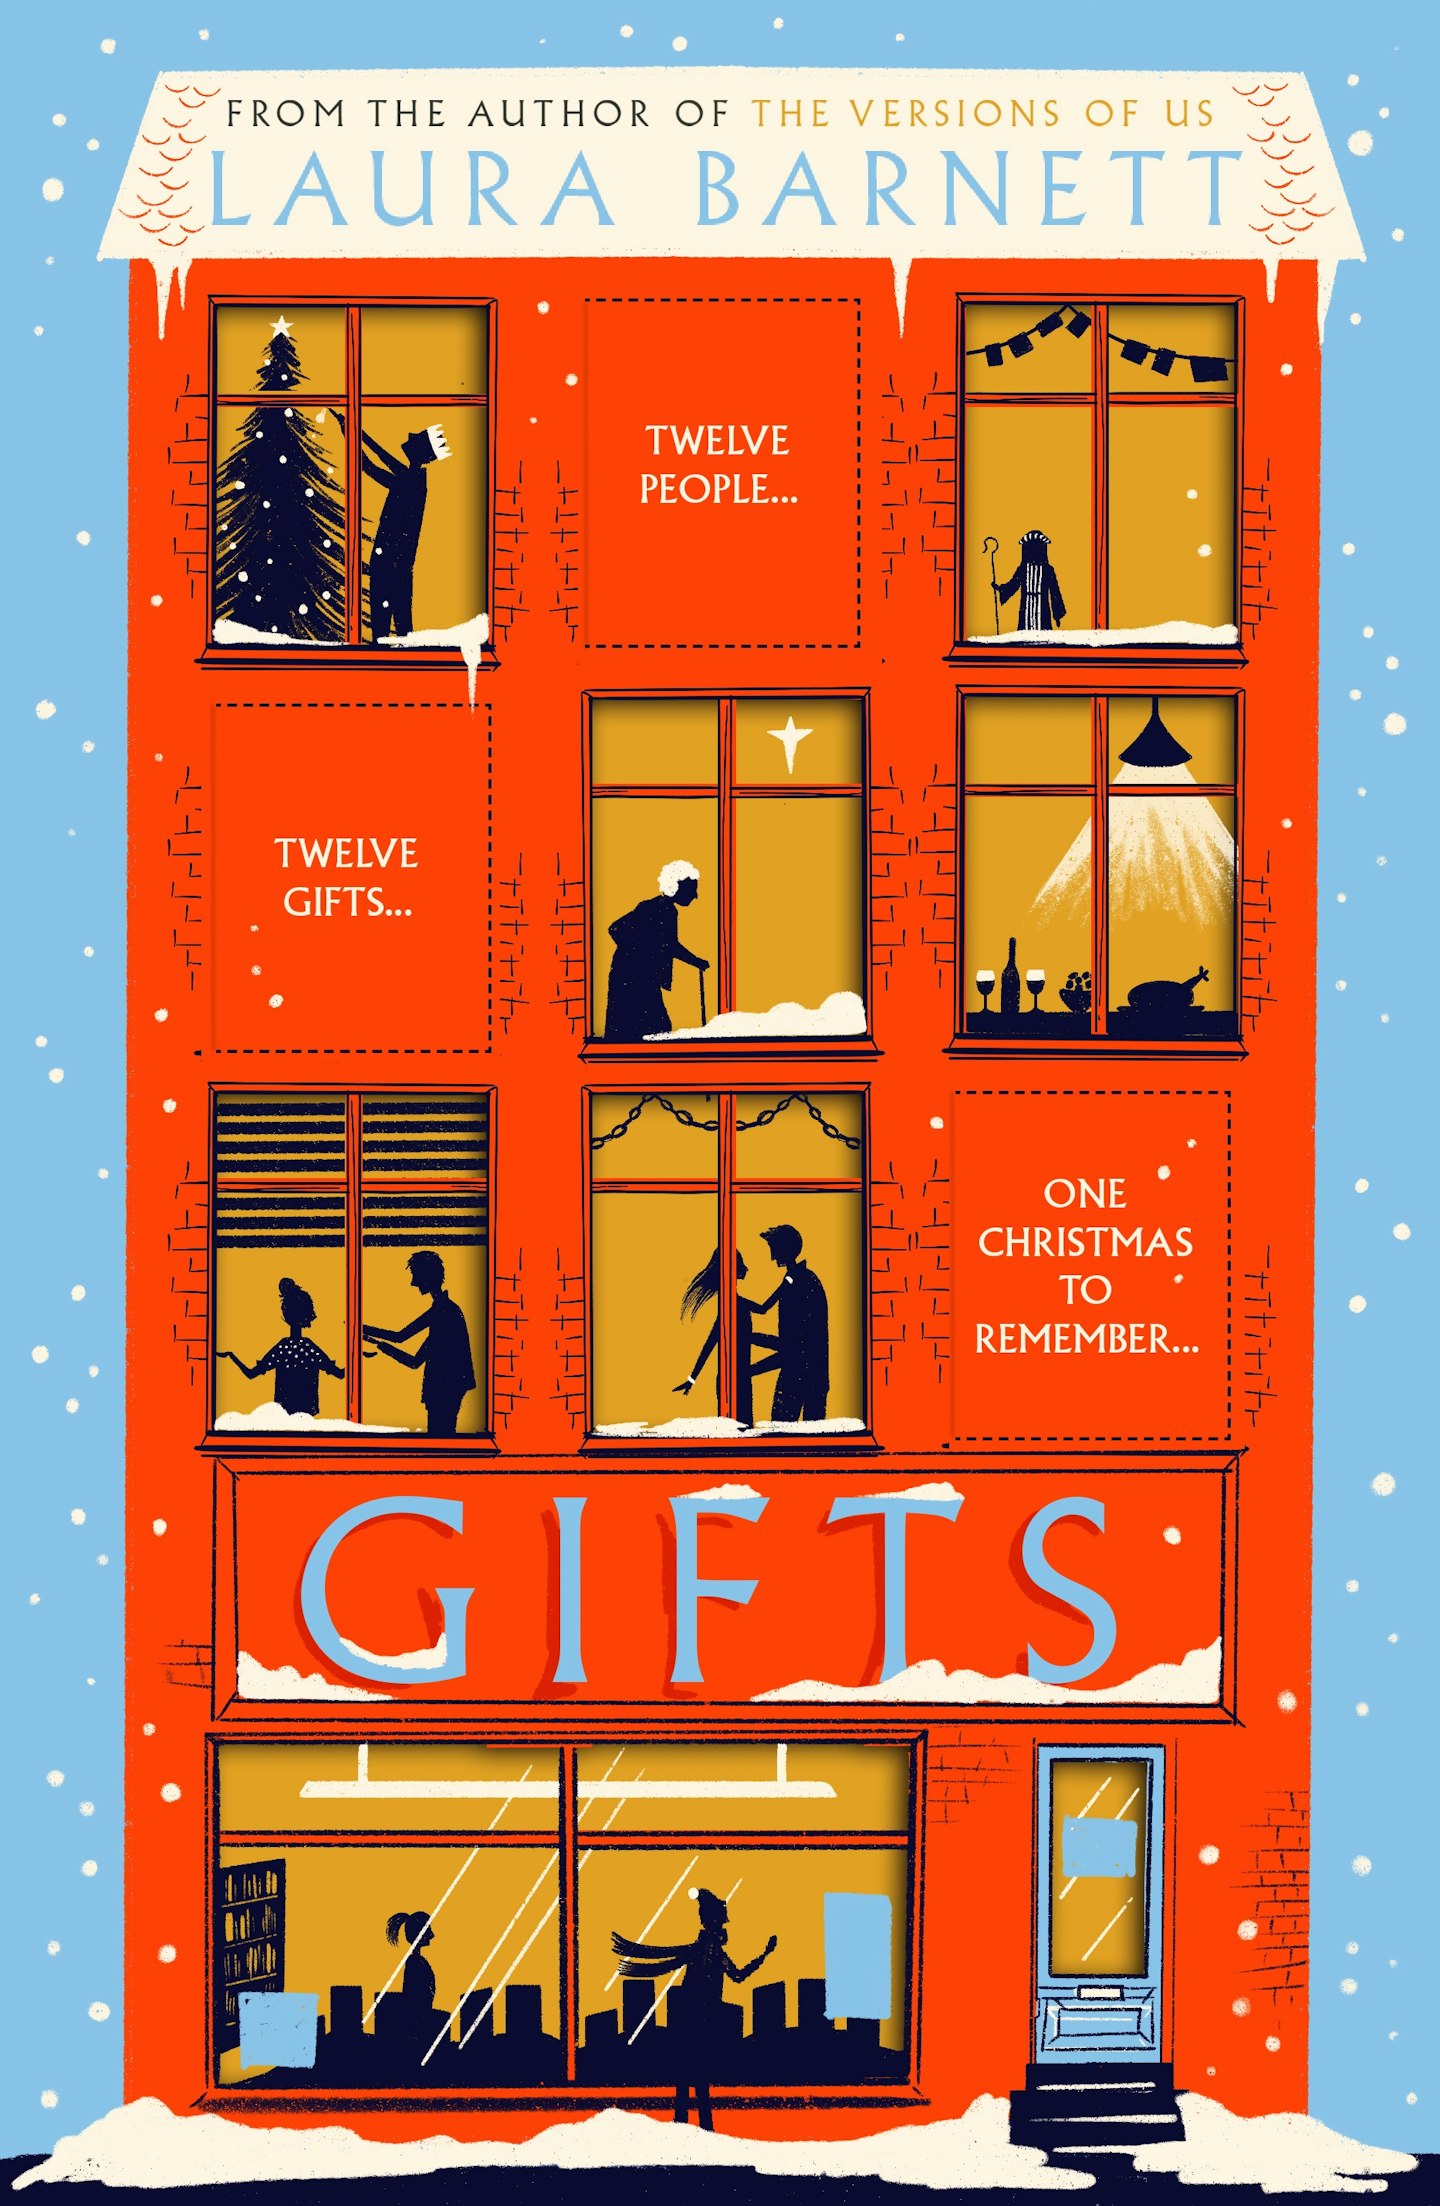 The cover of Laura Barnett's new book, Gifts